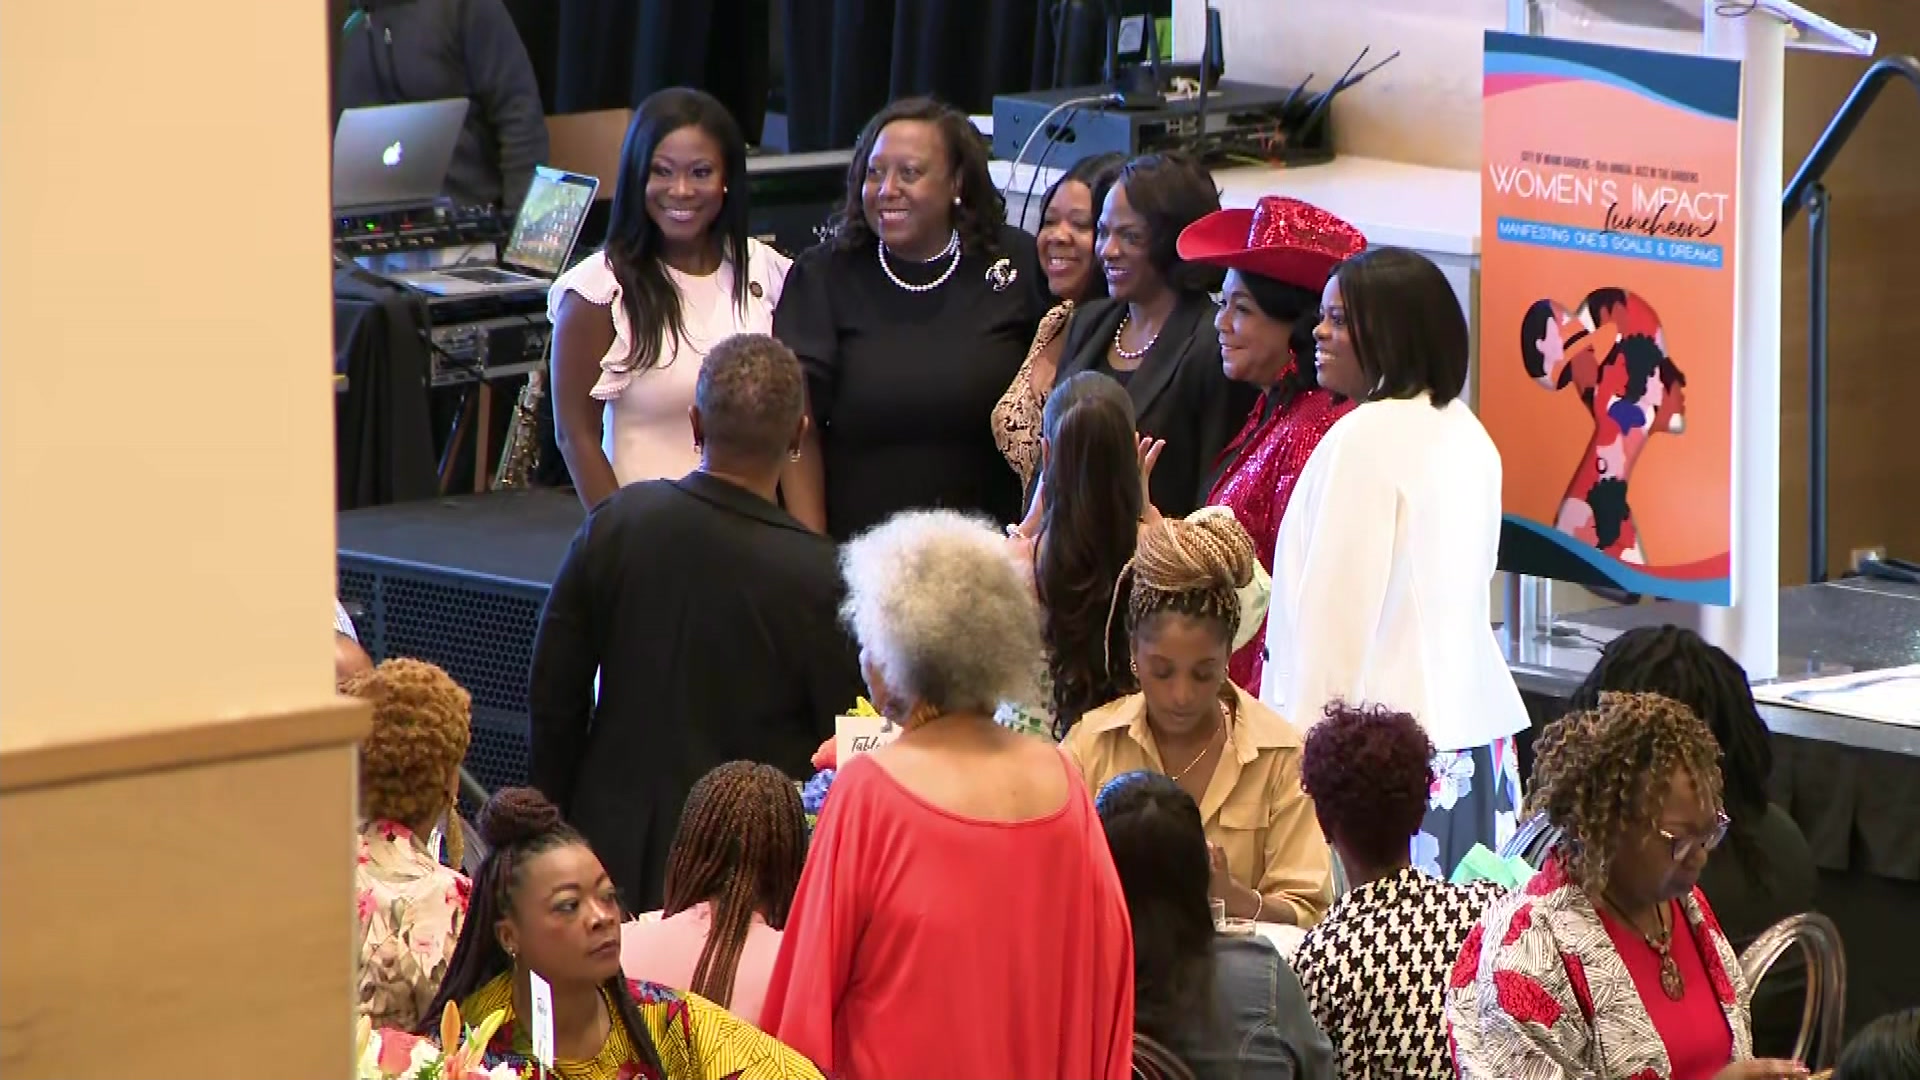 ‘This Is Such A Blessing’: Rep. Frederica Wilson Joins Jazz In The Gardens Women’s Empowerment Luncheon